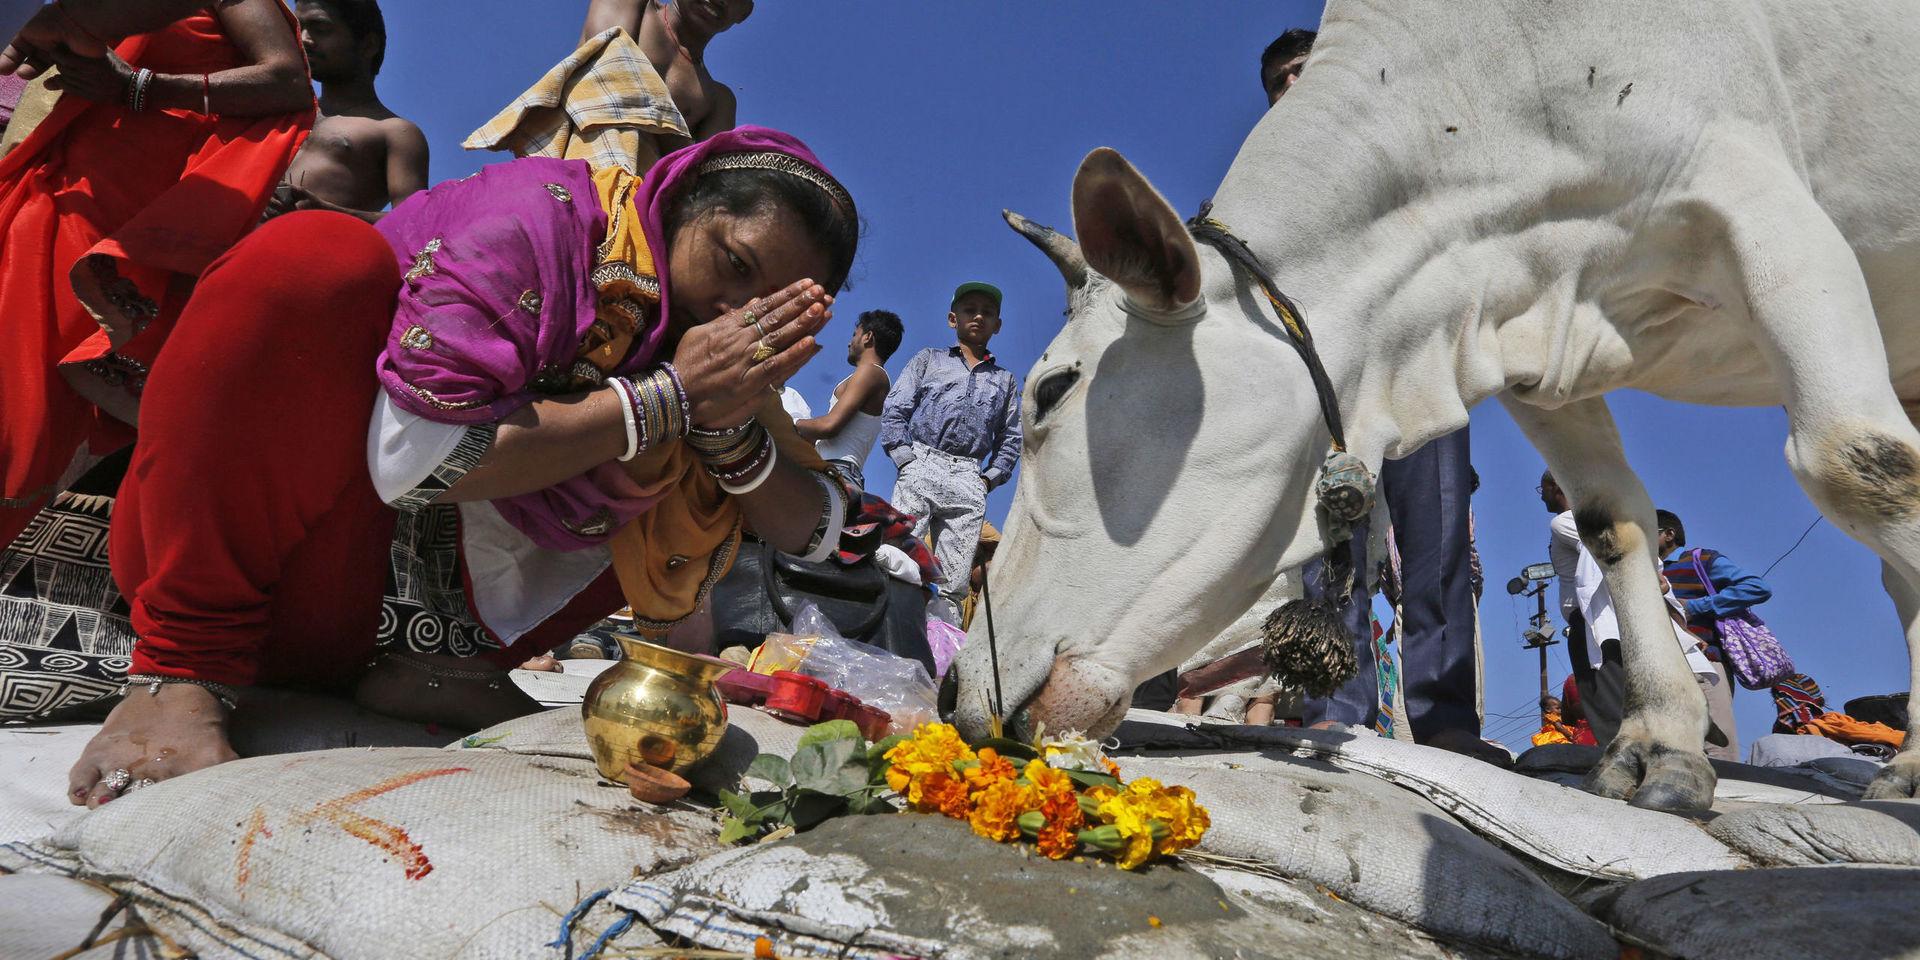 An Indian woman prays to a holy cow after taking a holy dip at the Sangam, the confluence of the Ganges and Yamuna and the mythical Saraswati, on the occasion of Hindu festival of Shivaratri, that marked the last day of the annual traditional fair of Magh Mela, in Allahabad, India , Friday, Feb. 24, 2017. Shivaratri, or the night of Shiva, is dedicated to the worship of Lord Shiva, the Hindu god of death and destruction. (AP Photo/Rajesh Kumar Singh)